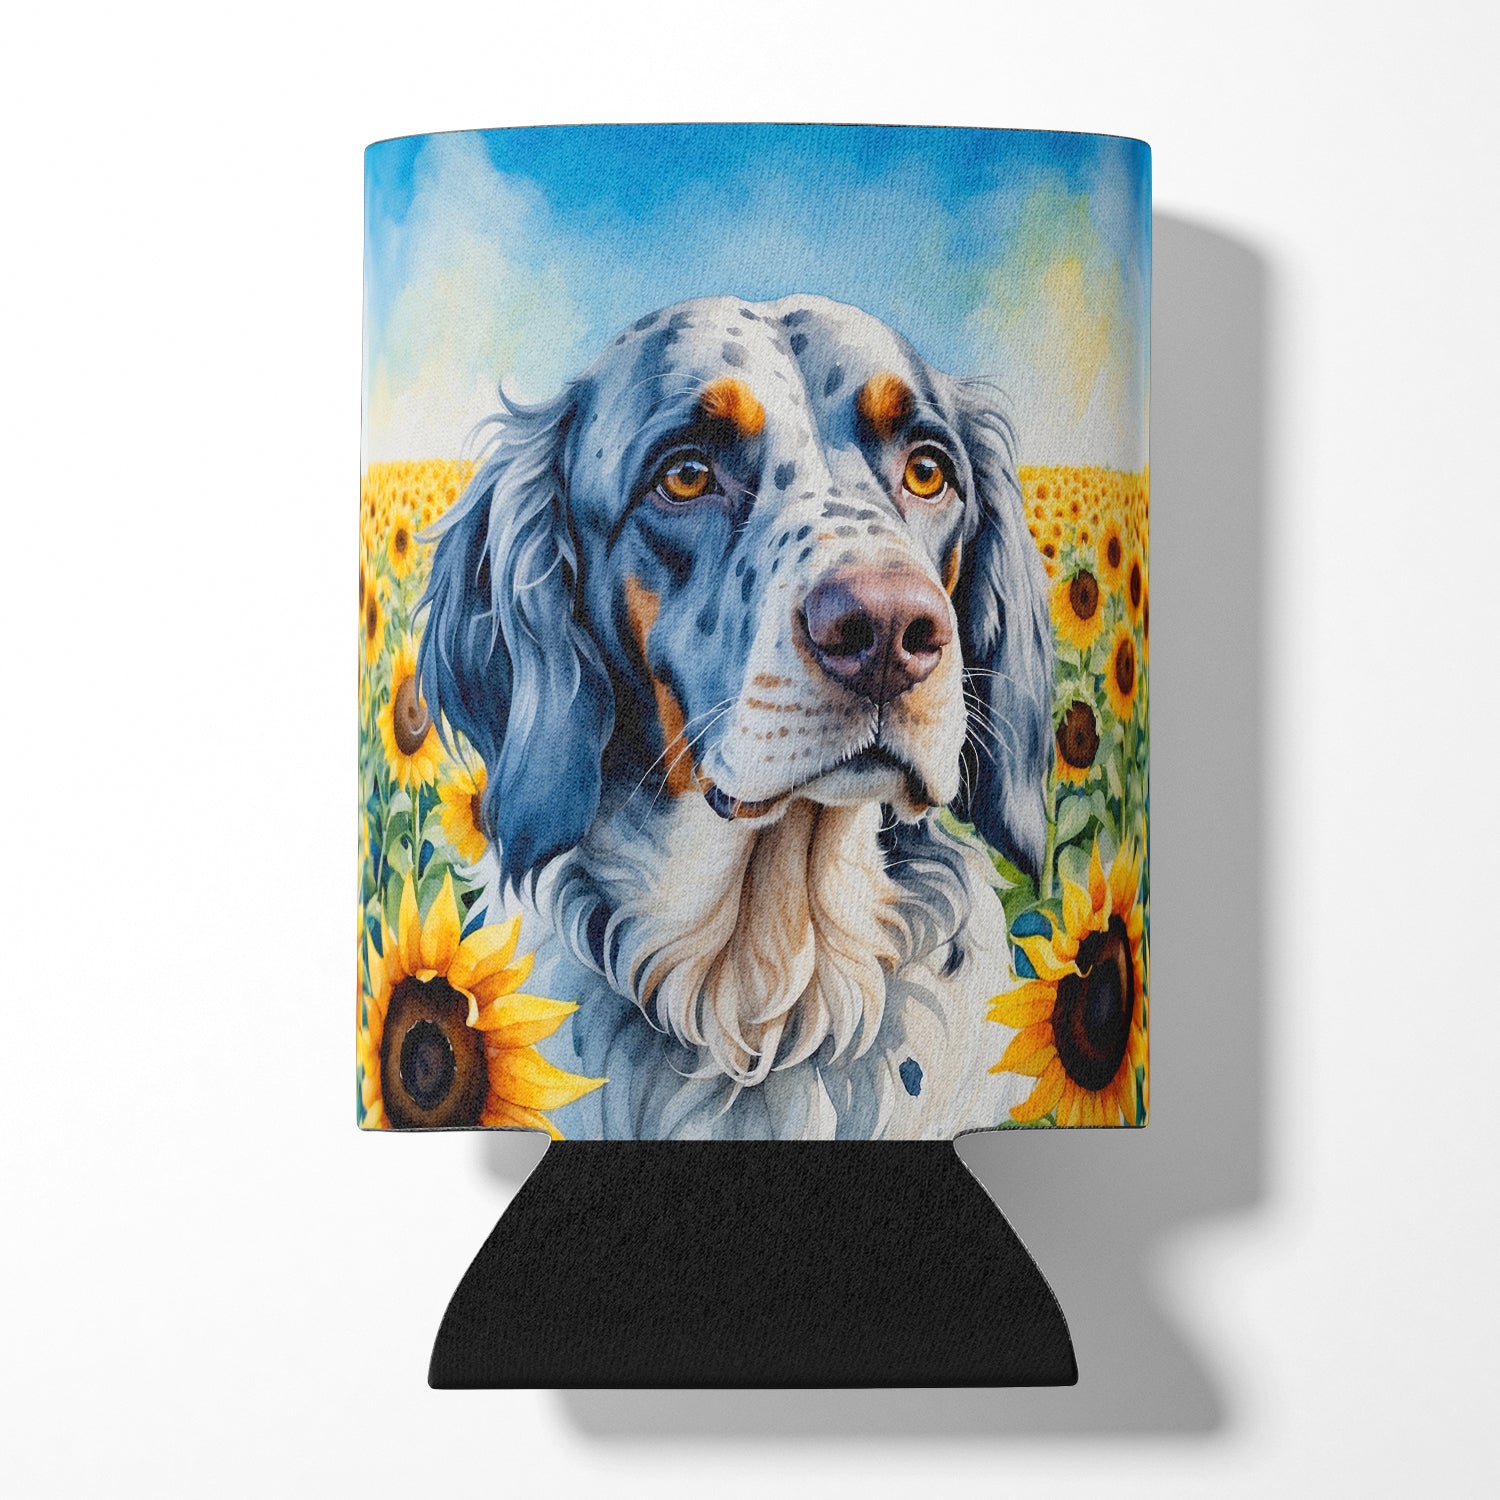 Buy this English Setter in Sunflowers Can or Bottle Hugger